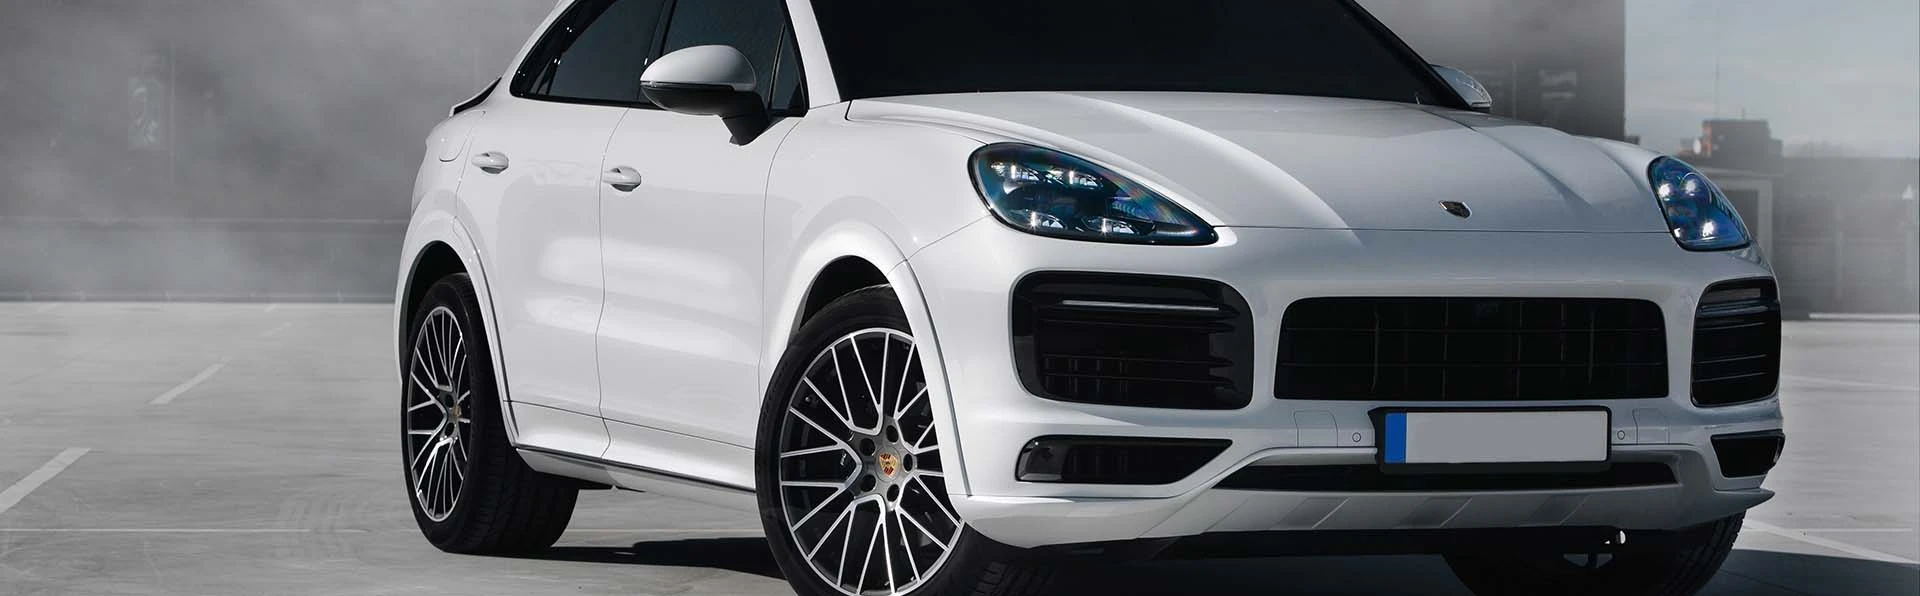 Latest Car News: The Porsche Cayenne will Go All-Electric in 2026